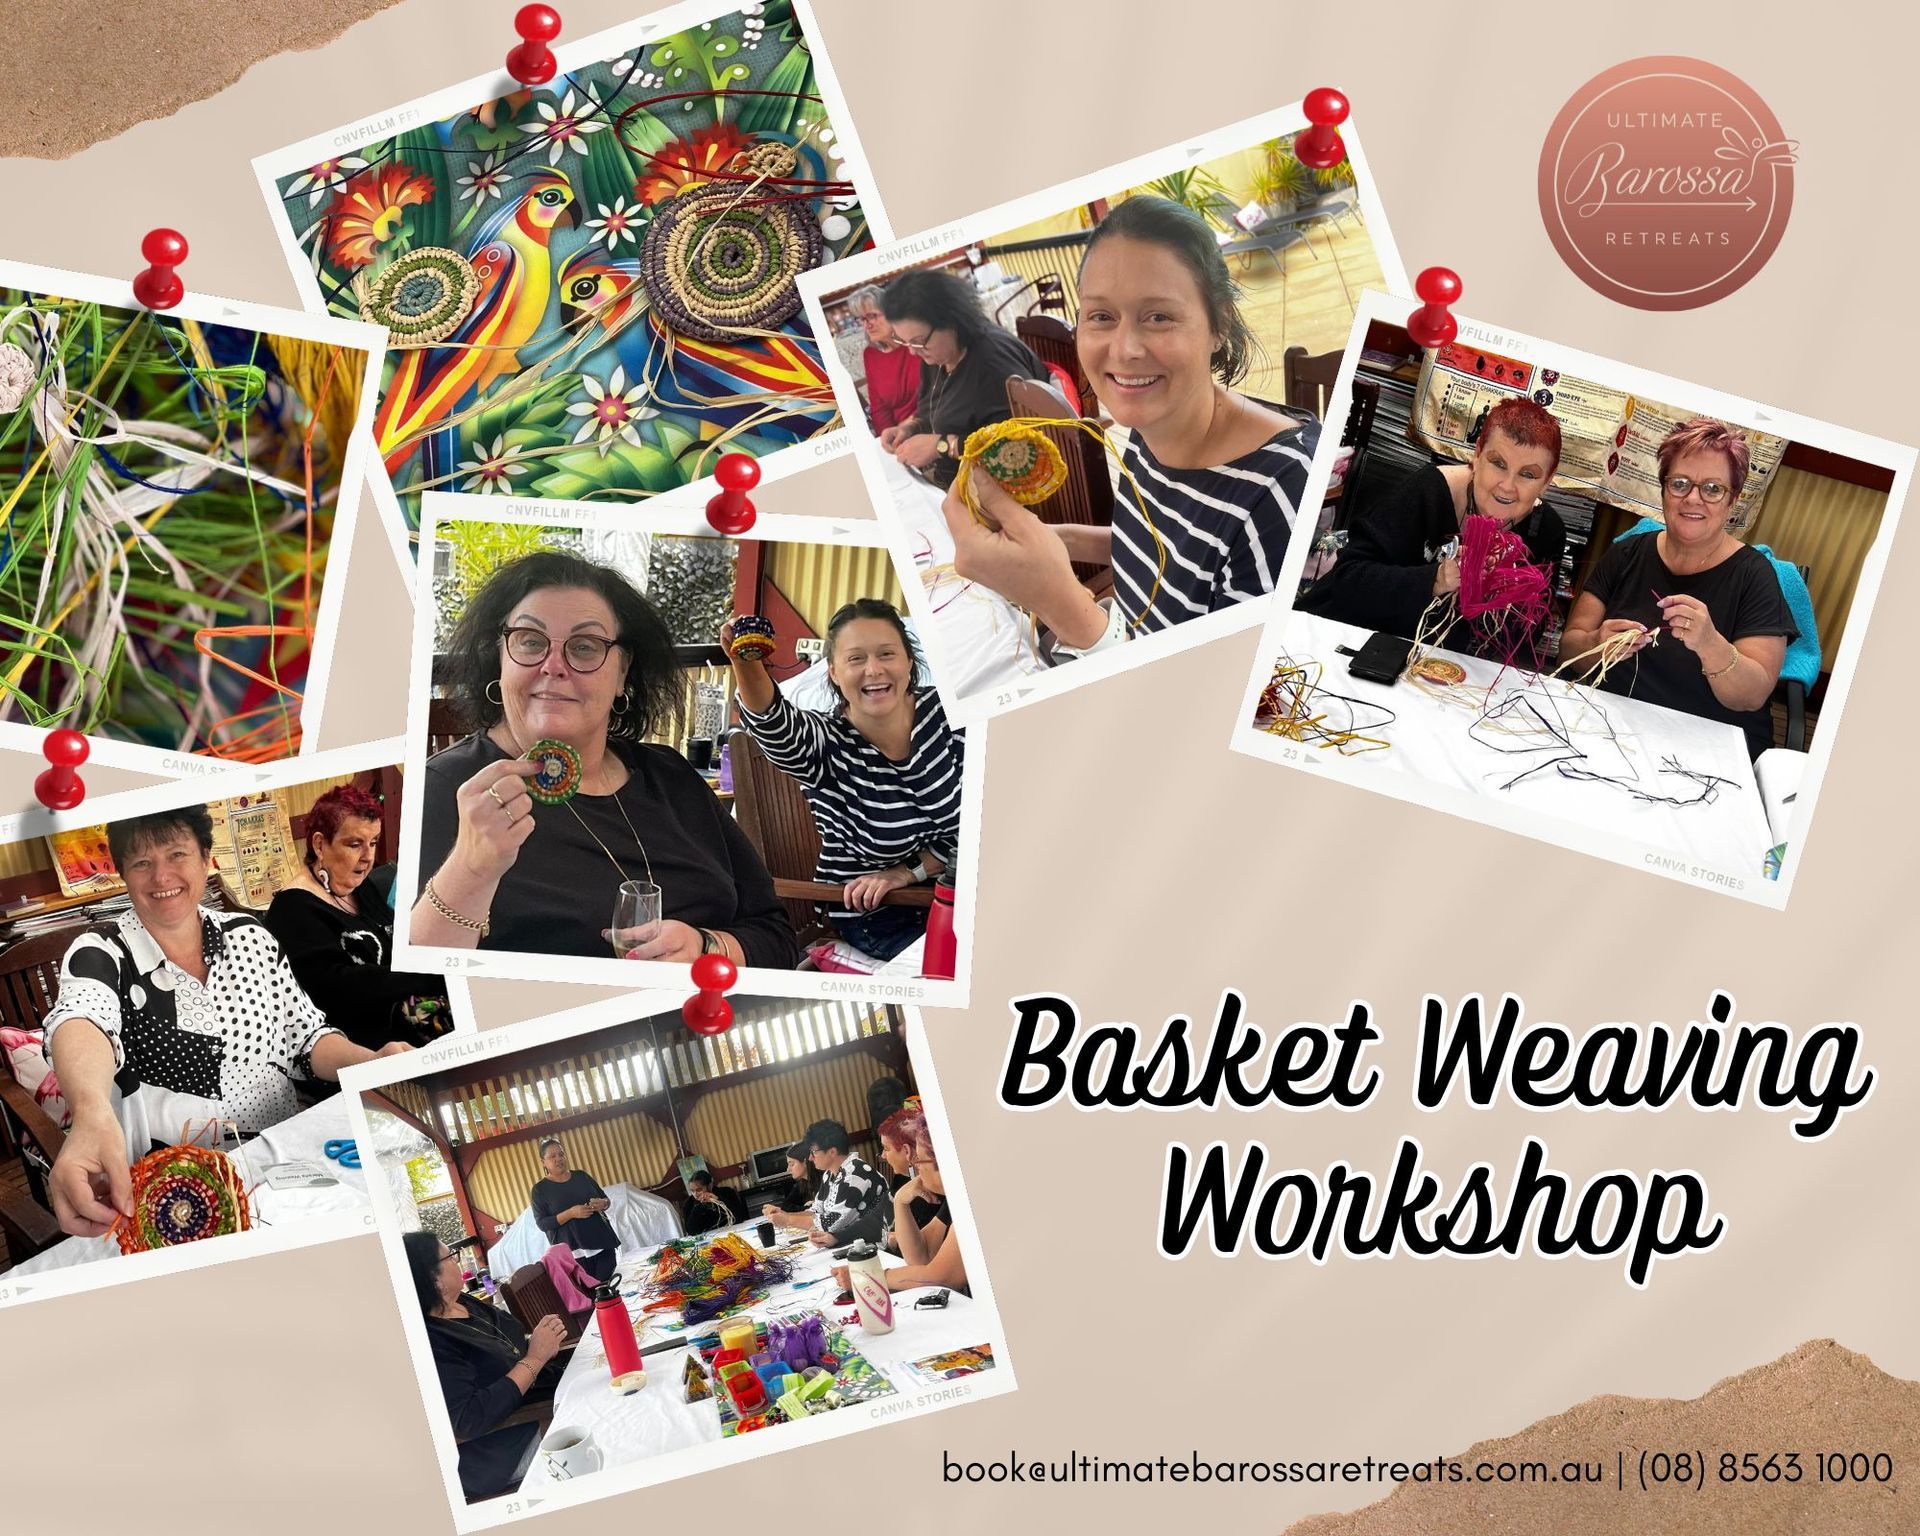 Embark on a transformative journey at the Ultimate Barossa Retreats with Mararla Weaving Workshops! Immerse yourself in the art of basket weaving guided by Kendall Fitzgerald, a proud Kaurna/Narungga woman with deep roots in the Adelaide Aboriginal community. 